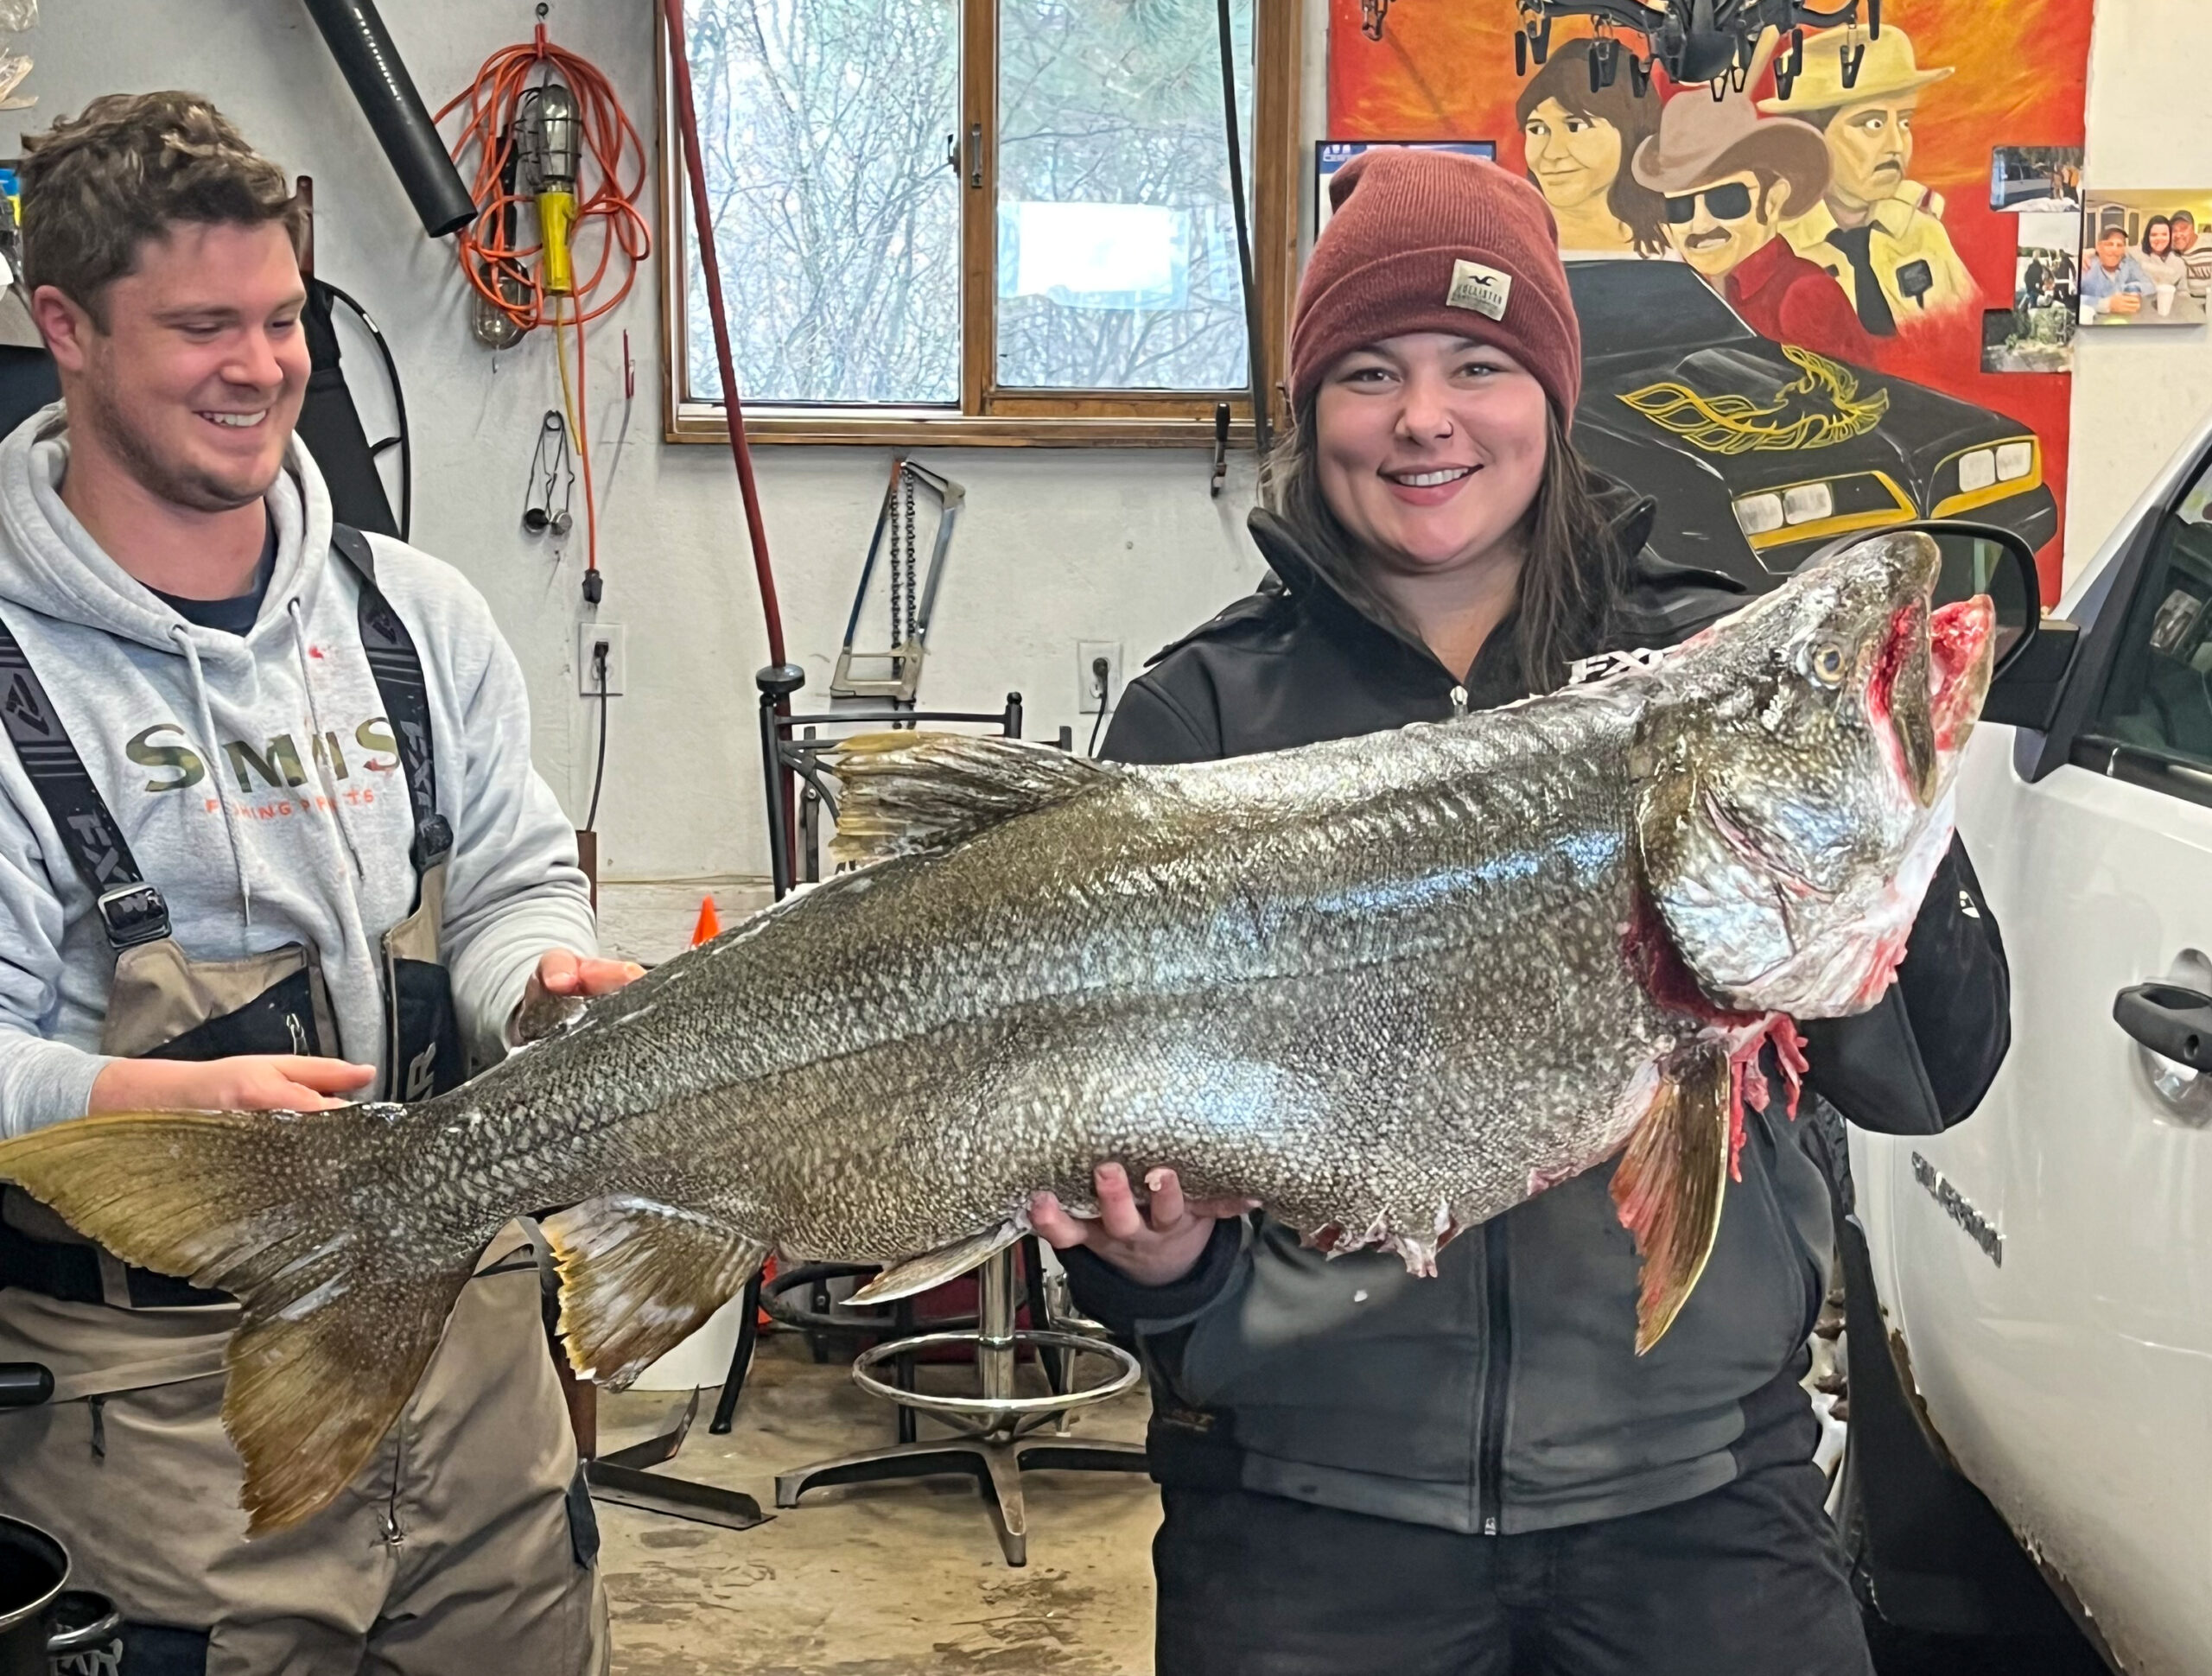 Ontario Anglers Have to Drill Second Hole to Land Giant Laker